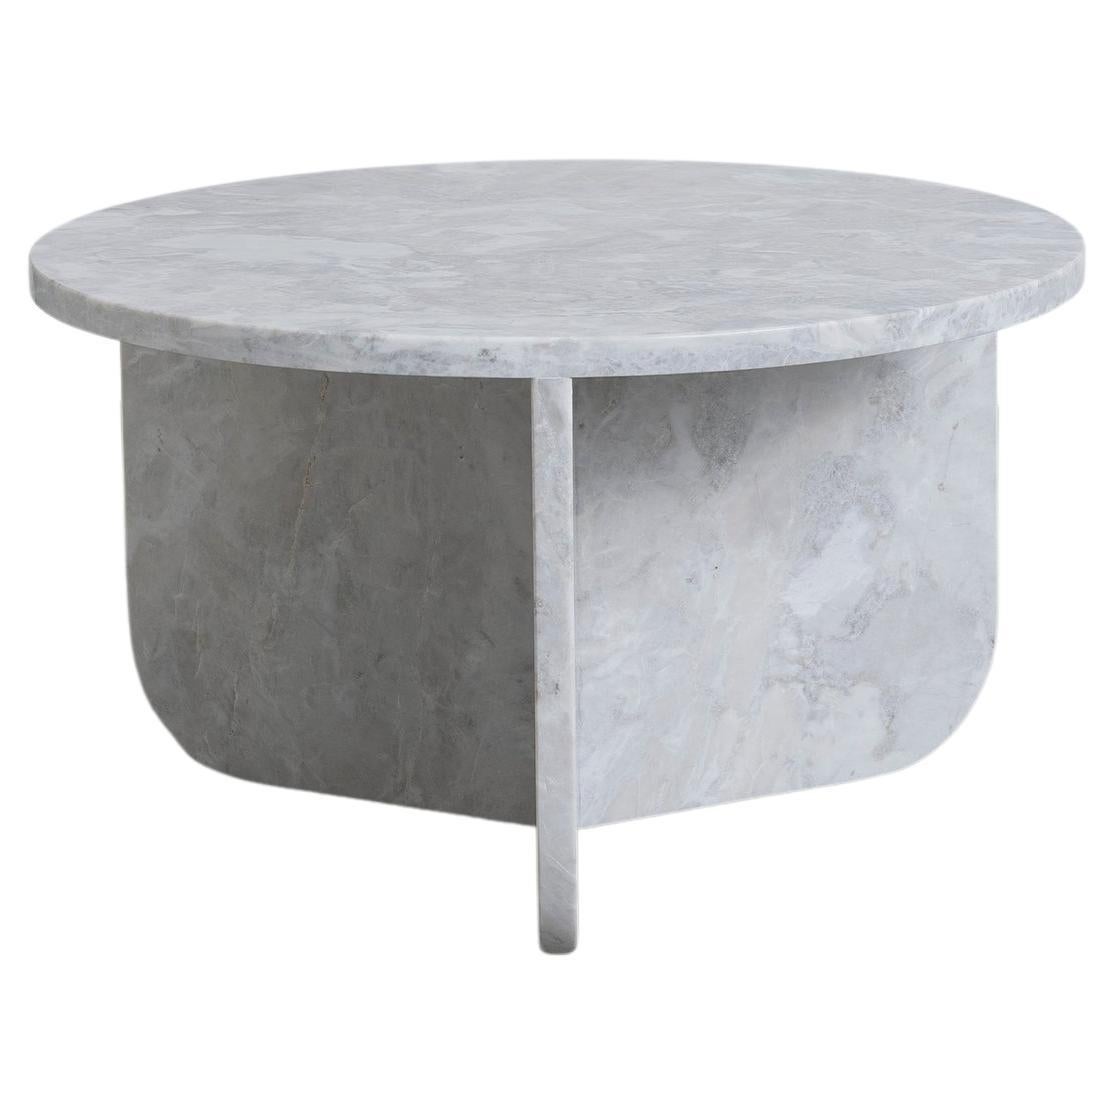 Leme Table, Low, by Rain, Contemporary Side Table, Grey Alba Marble